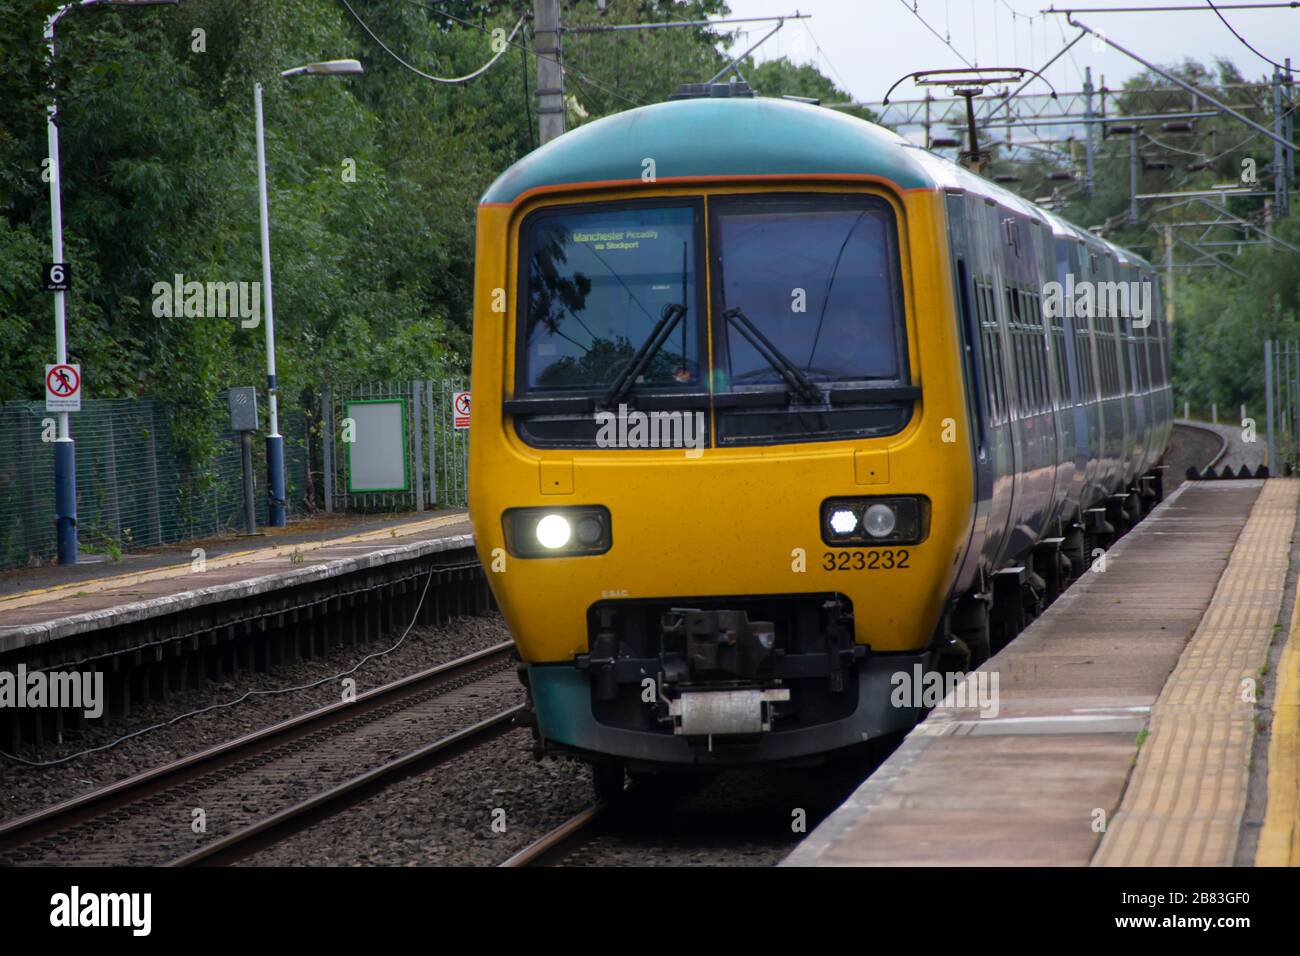 Northern Trains Class 323 electric multiple-unit, suburban train, entering railway station at Bramhall, Stockport, Cheshire, near Manchester, England Stock Photo